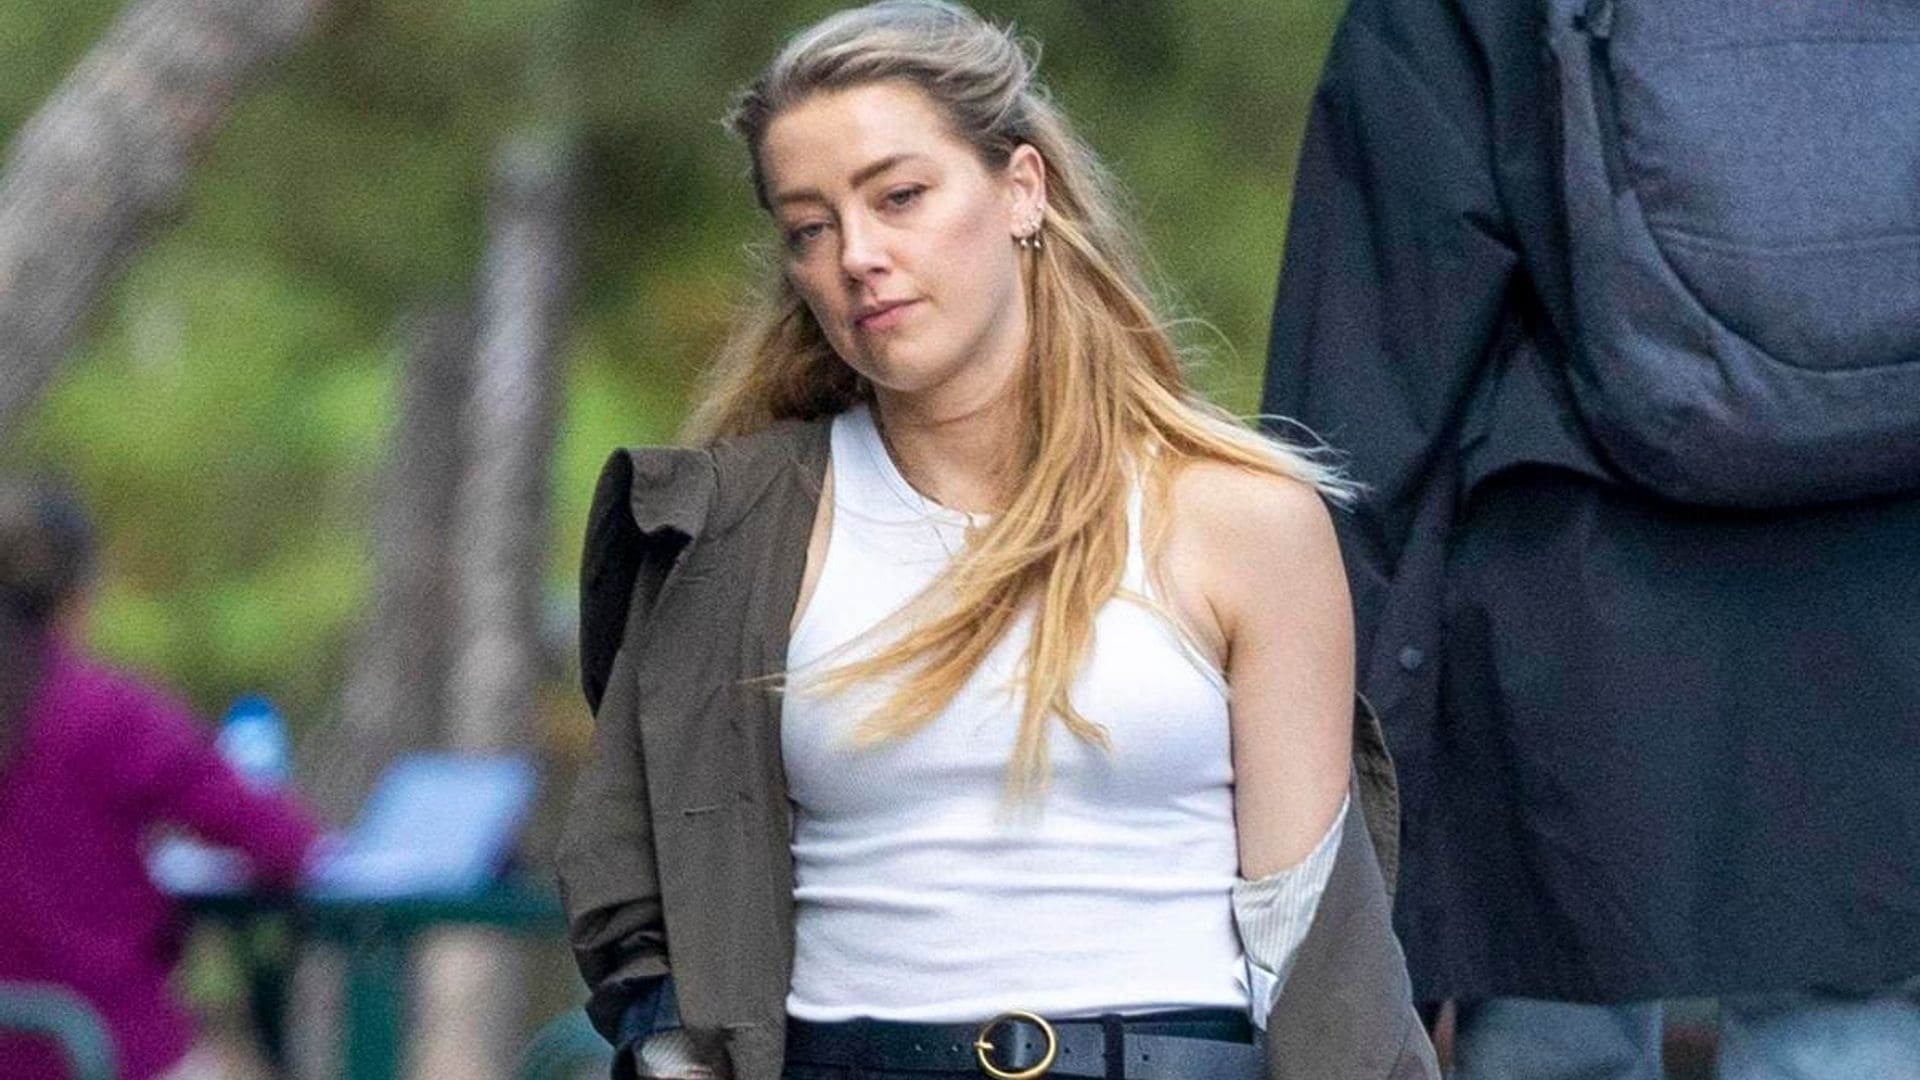 Amber Heard uses a cane while spending time with her lookalike sister